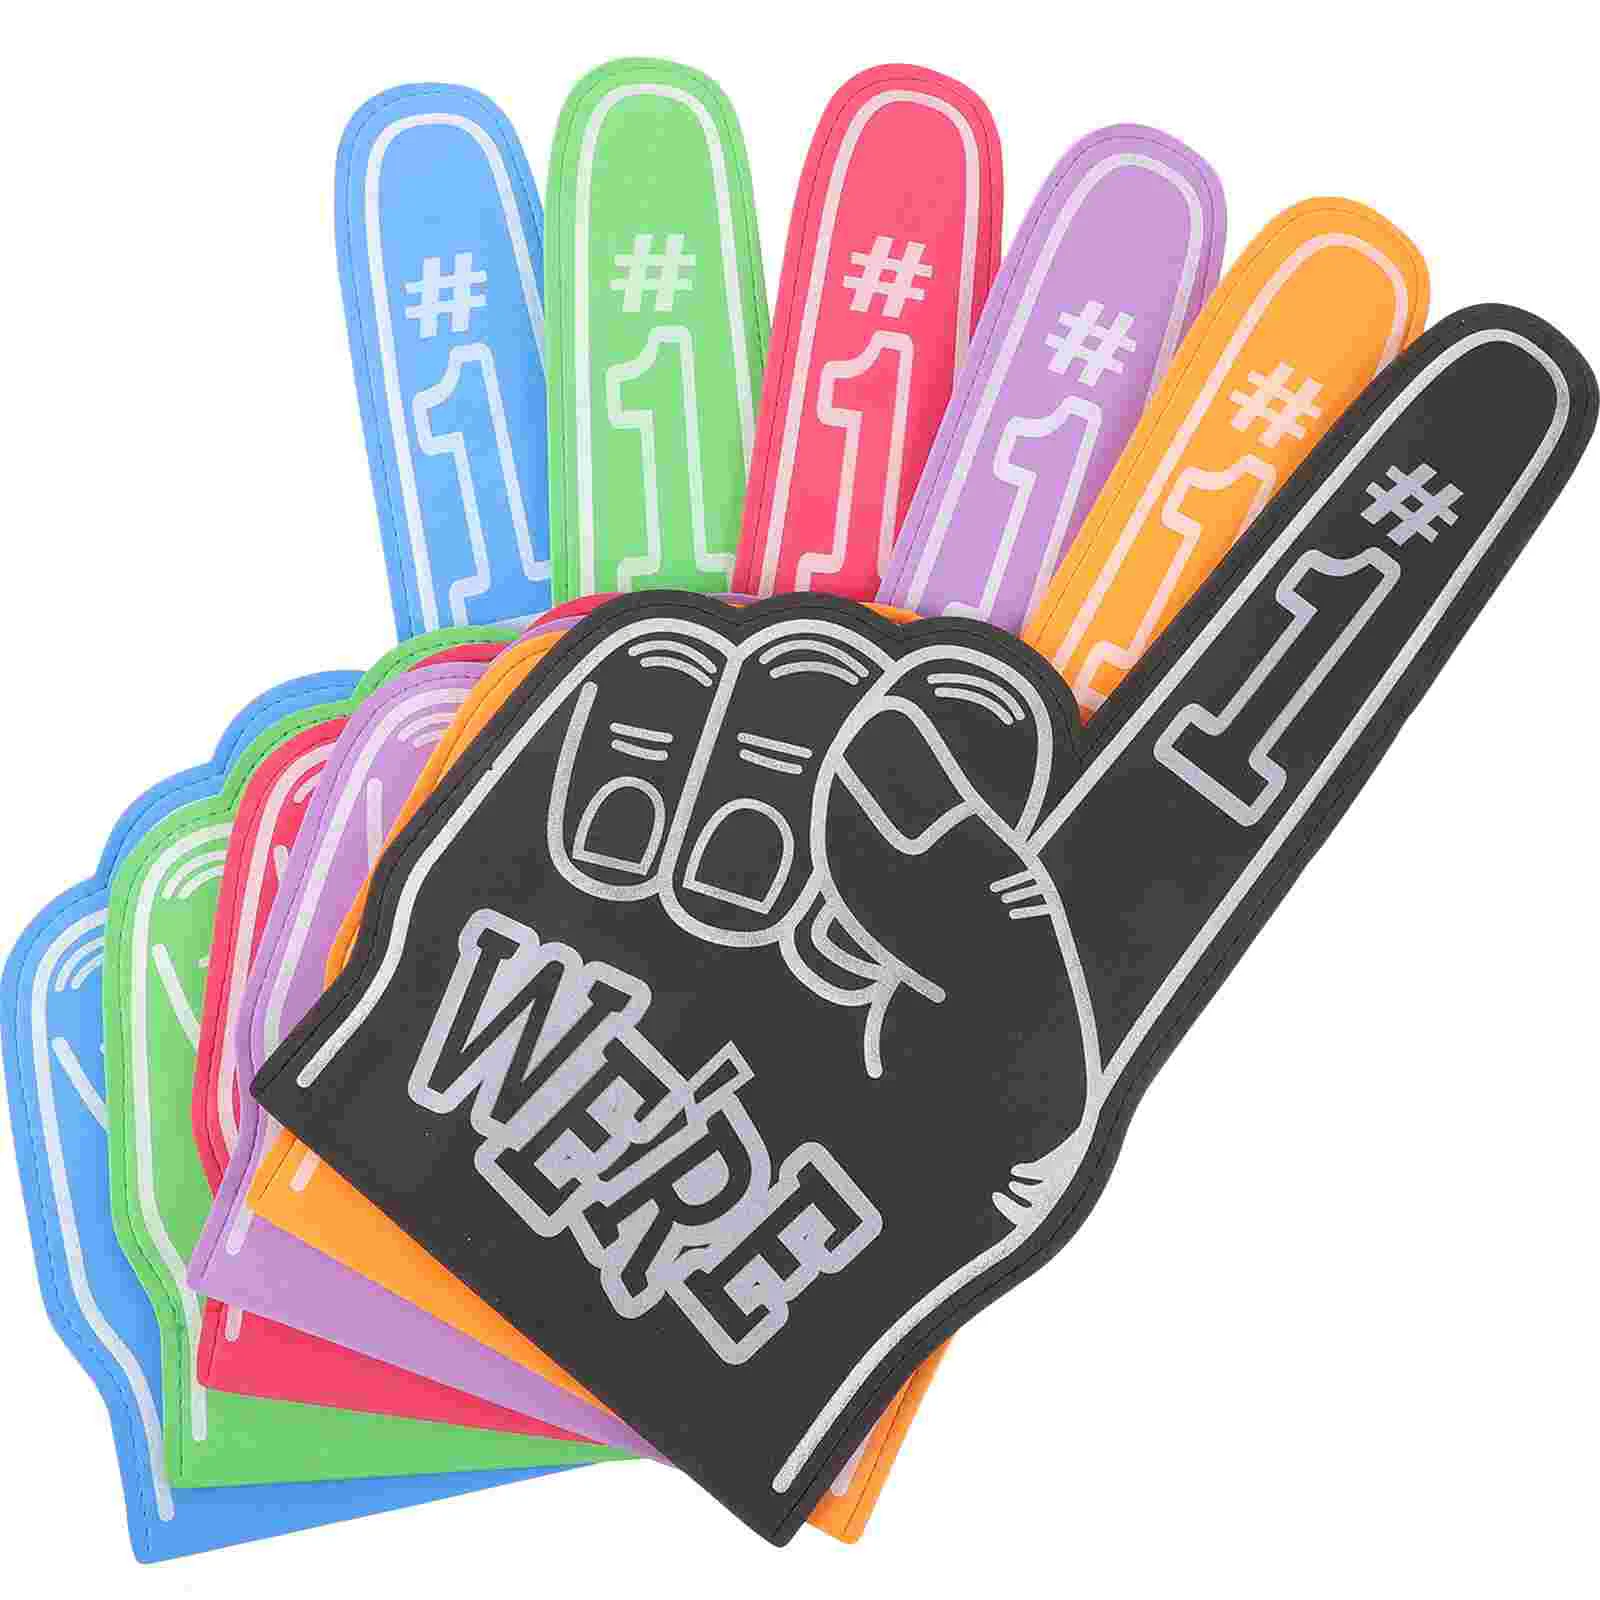 

6 Pcs Eva Palm Small Foam Fingers Sports Cheer Prop Gloves Cheerleading Pointer for Hands